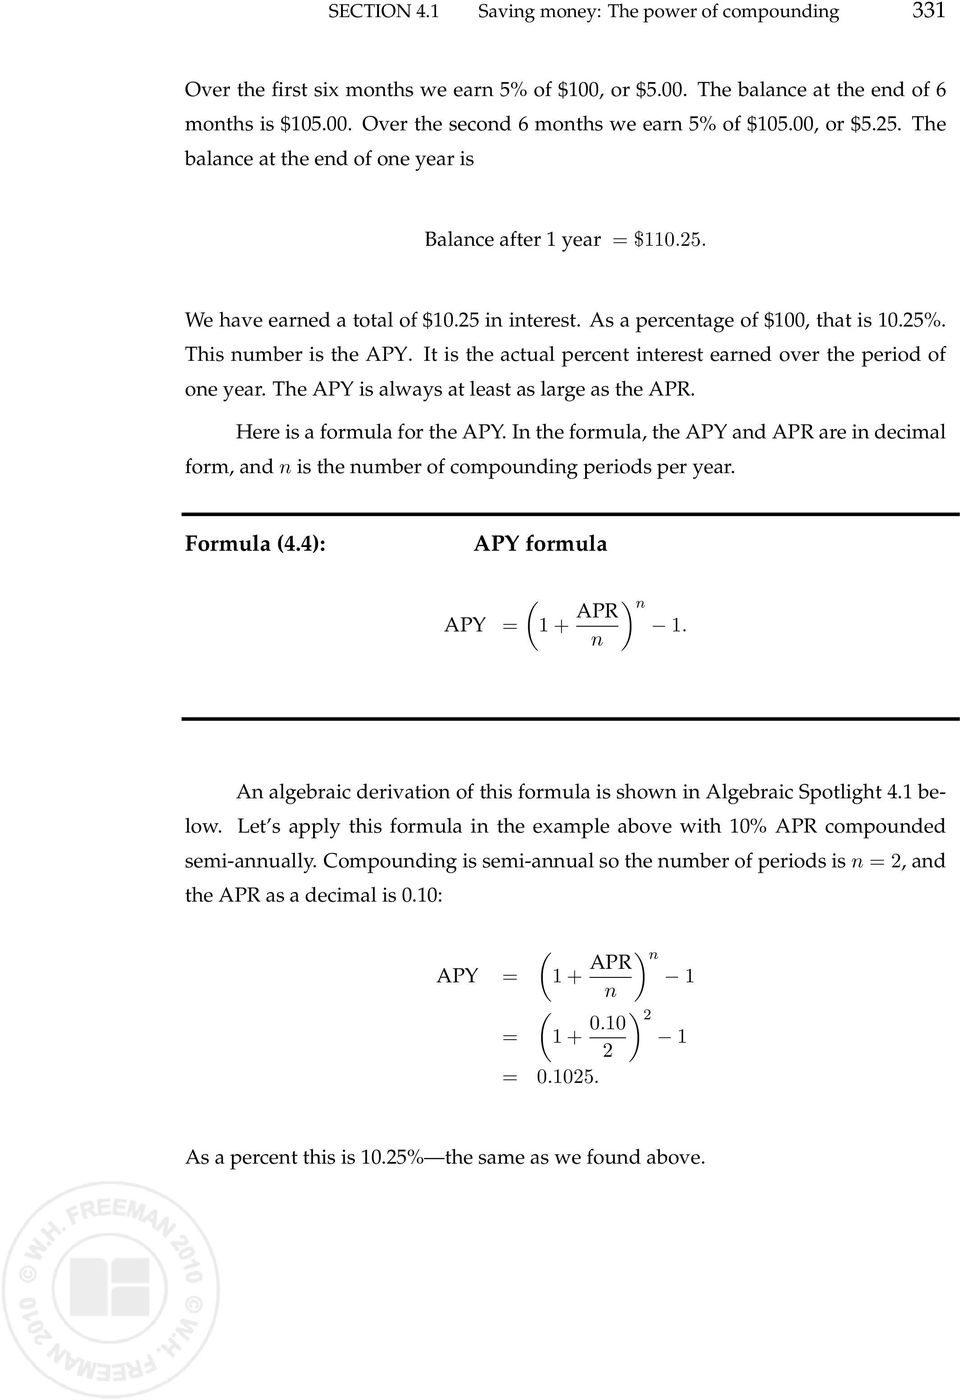 It is the actual percent interest earned over the period of one year. The APY is always at least as large as the APR. Here is a formula for the APY.